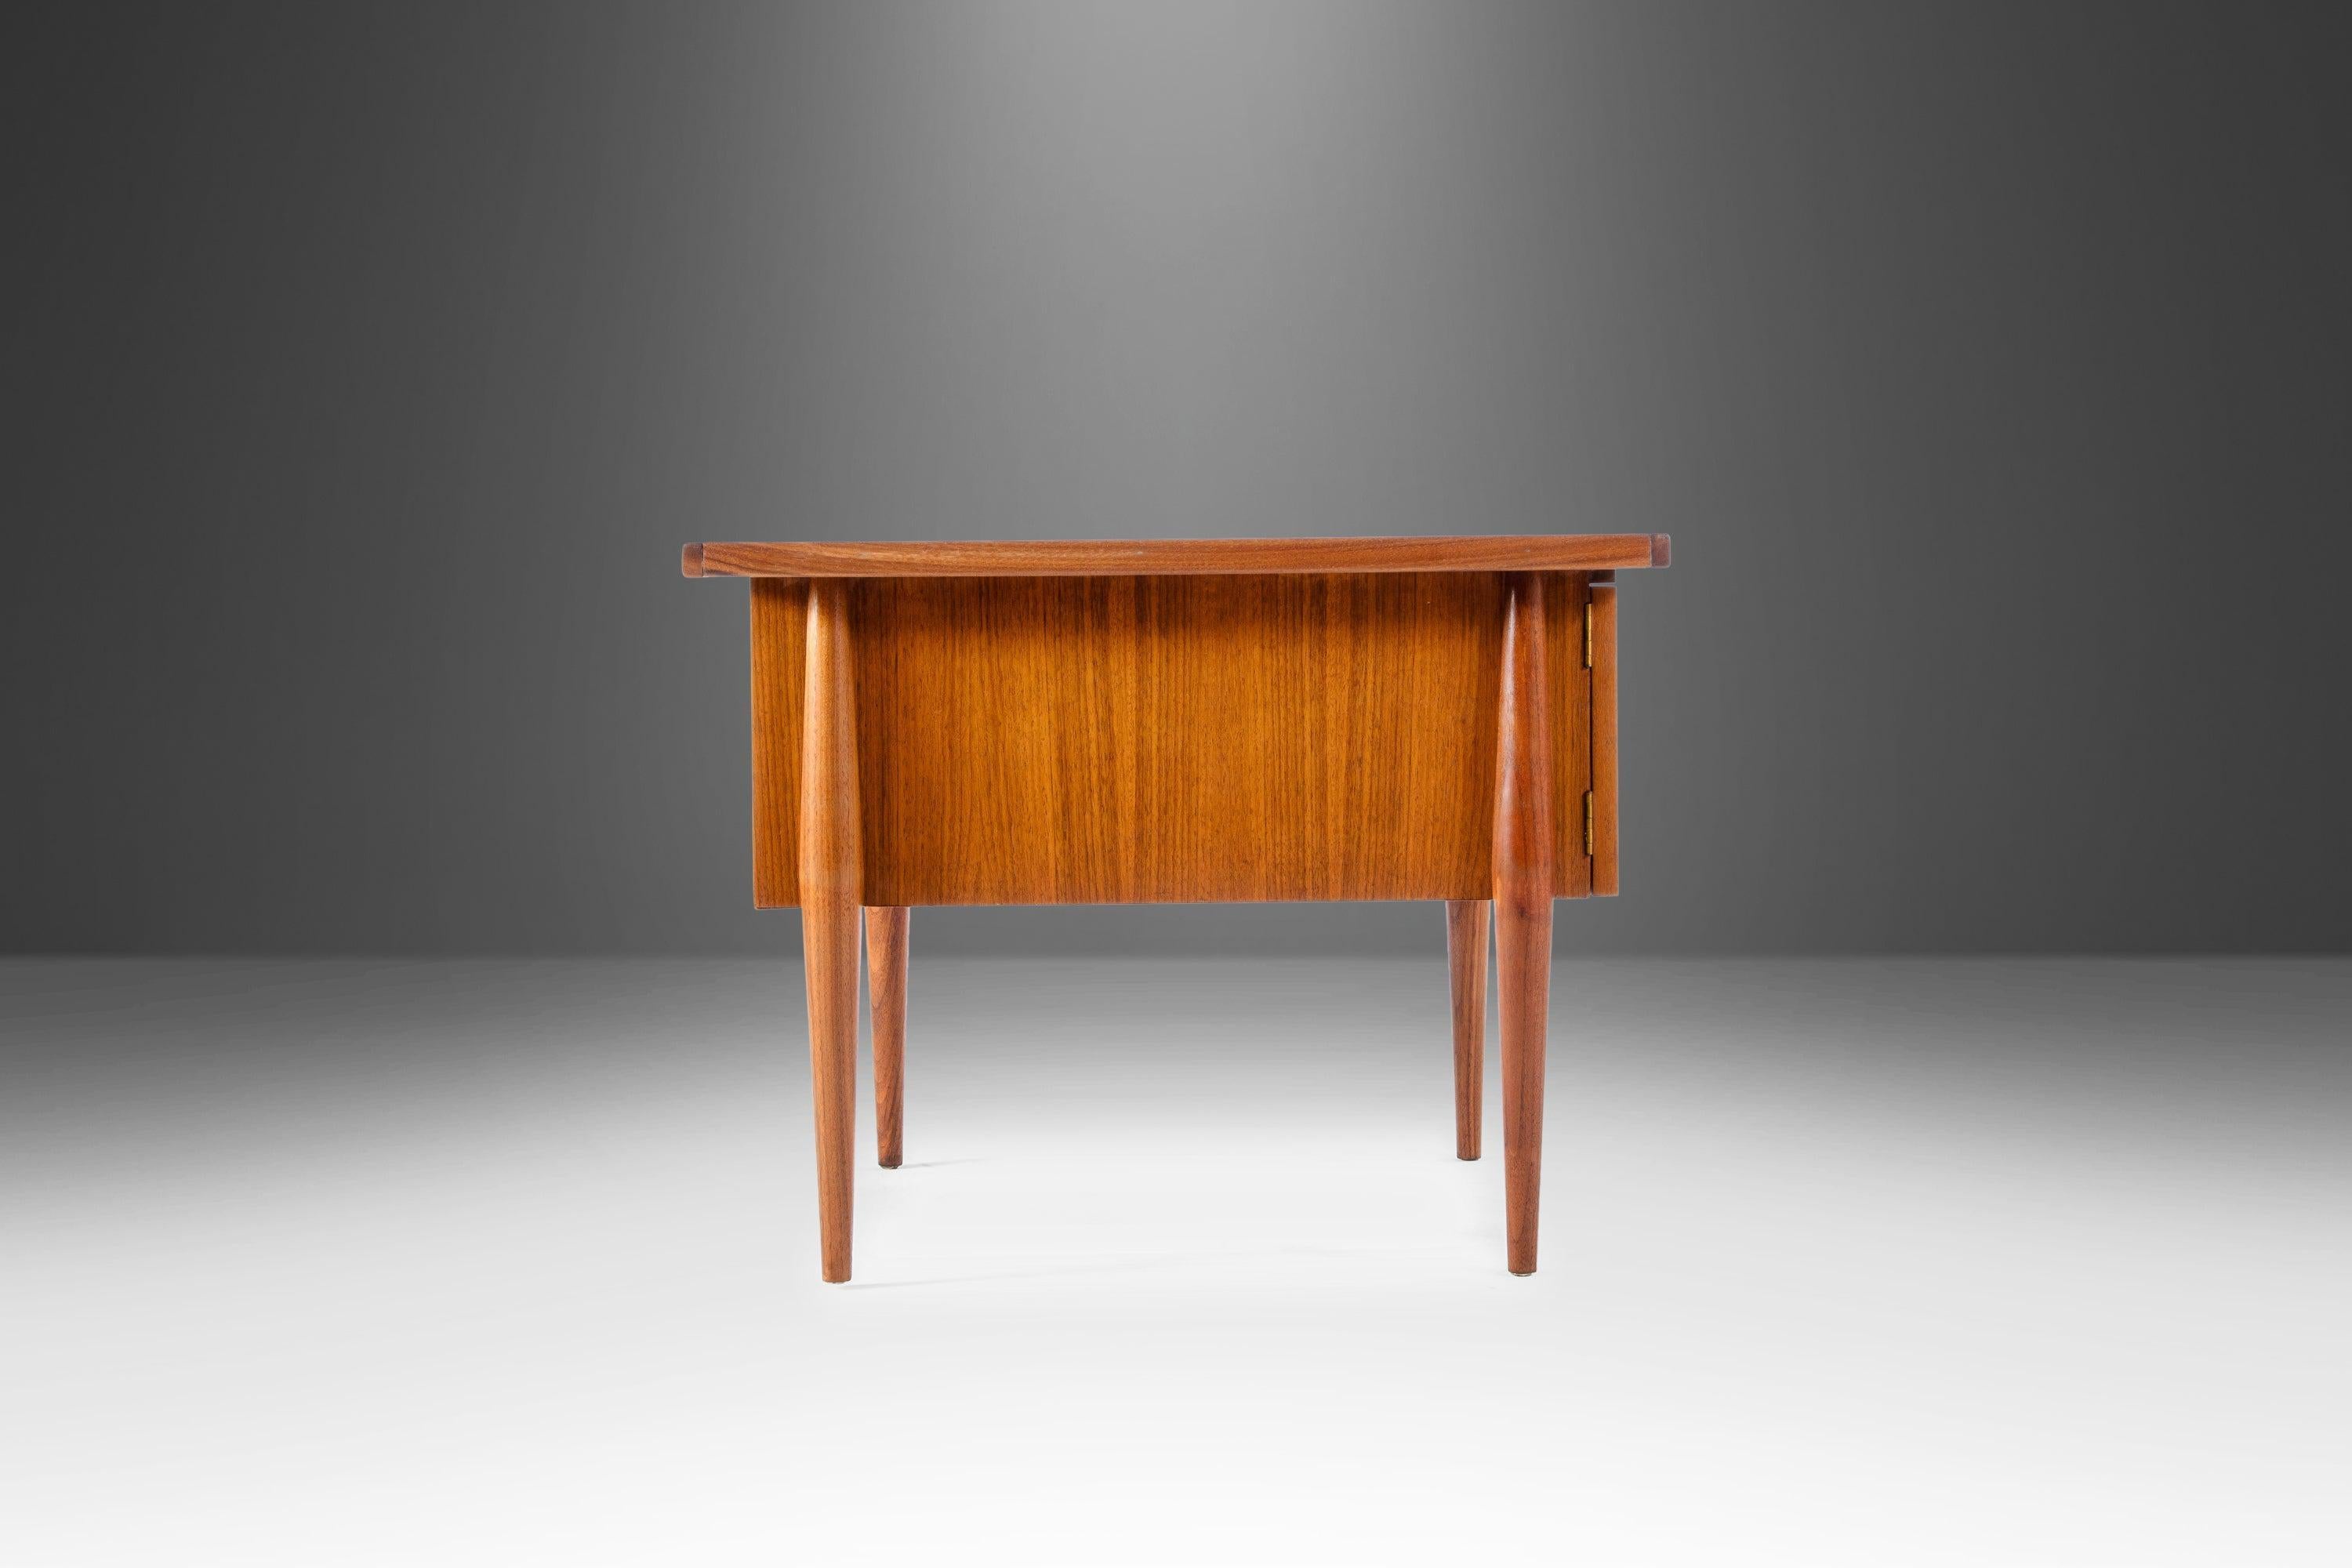 Mid-Century Modern End Table Table in Cane and Walnut by Jack Cartwright for Founders, USA, c 1960s